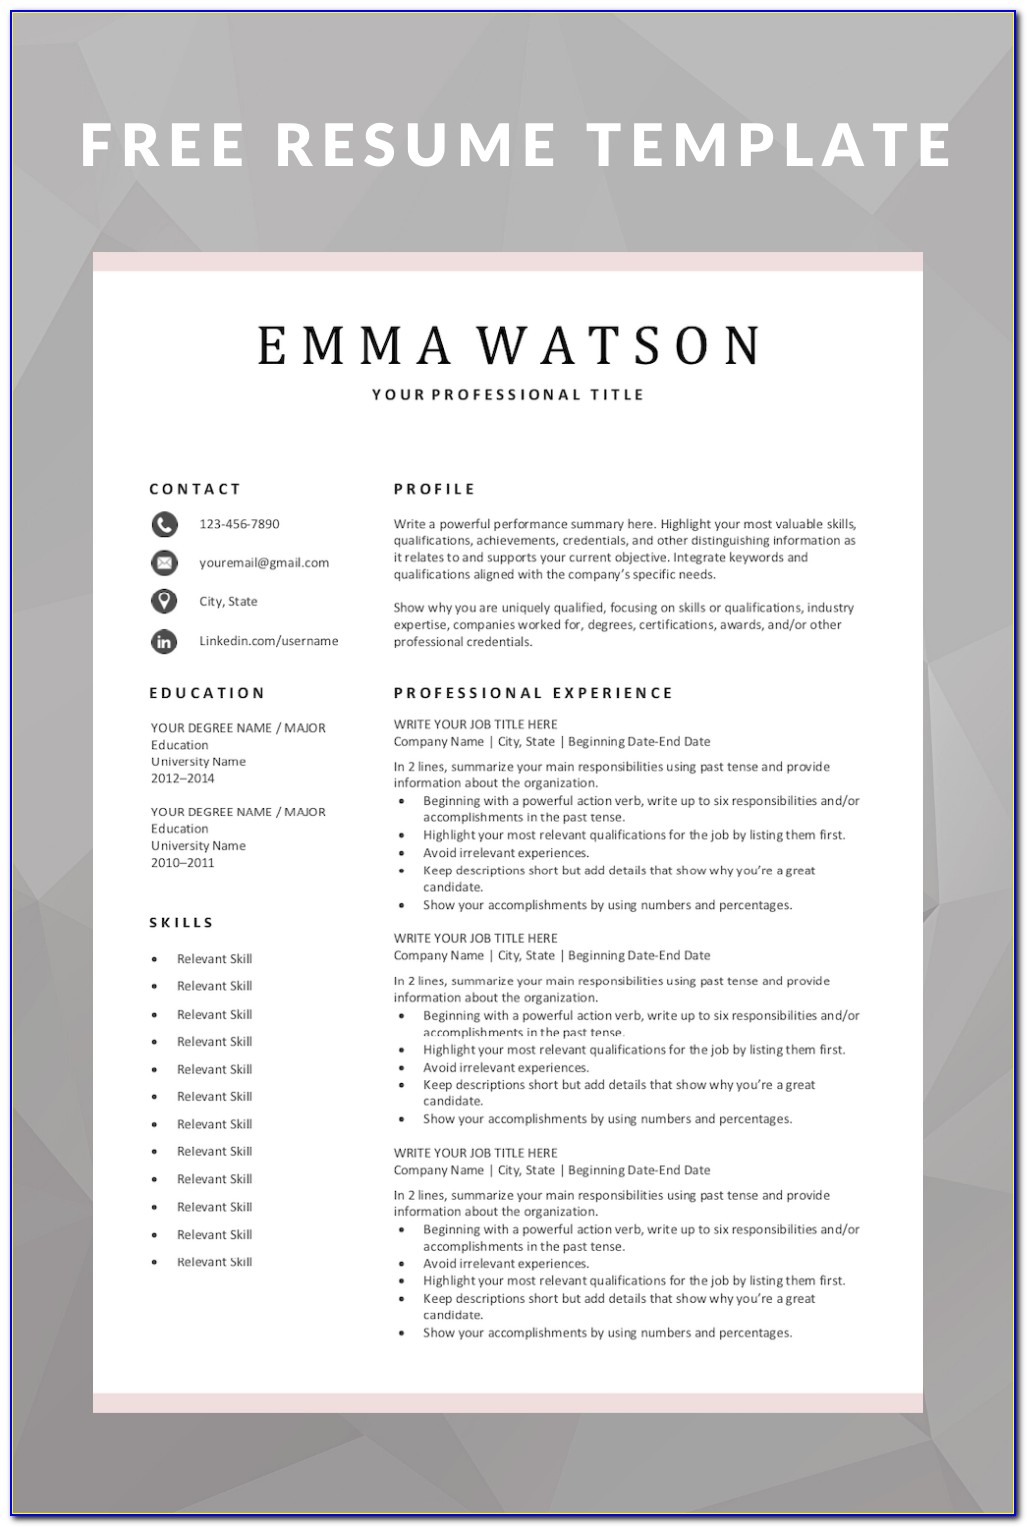 Completely Free Resume Template Download